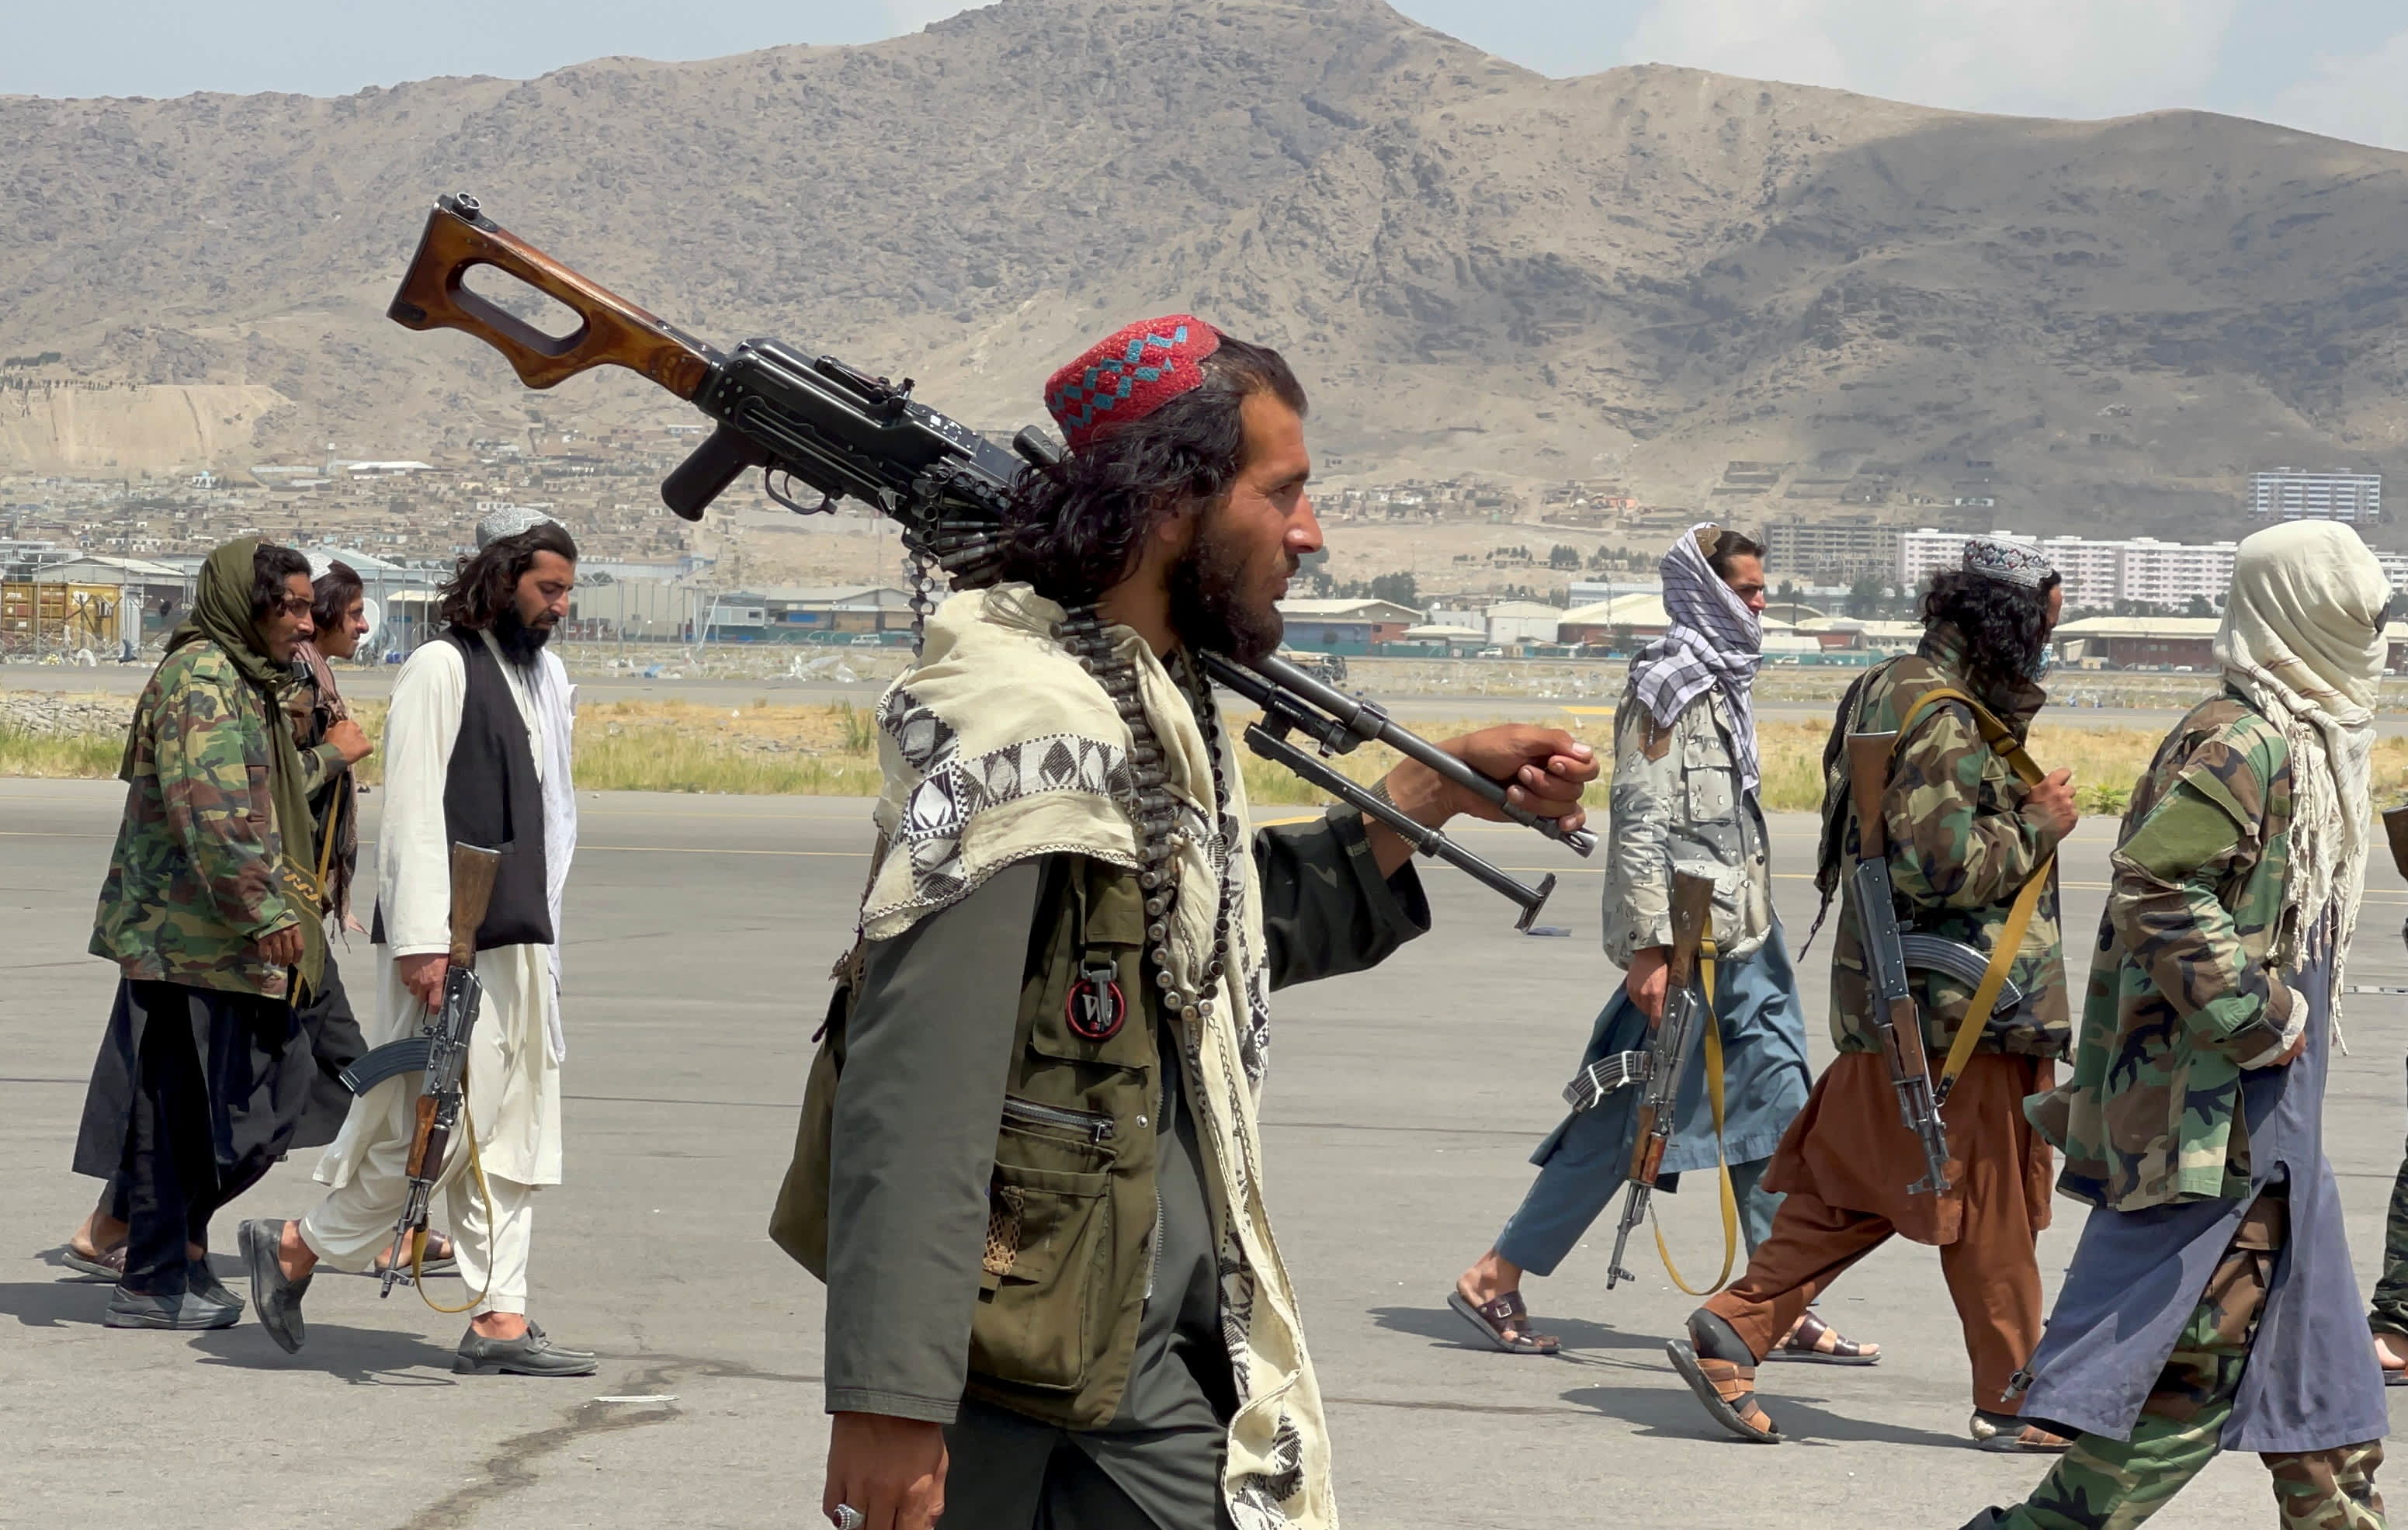 106935462-16304183352021-08-31t133953z_1932720083_rc2bgp9zqh7p_rtrmadp_0_afghanistan-conflict-airport-taliban